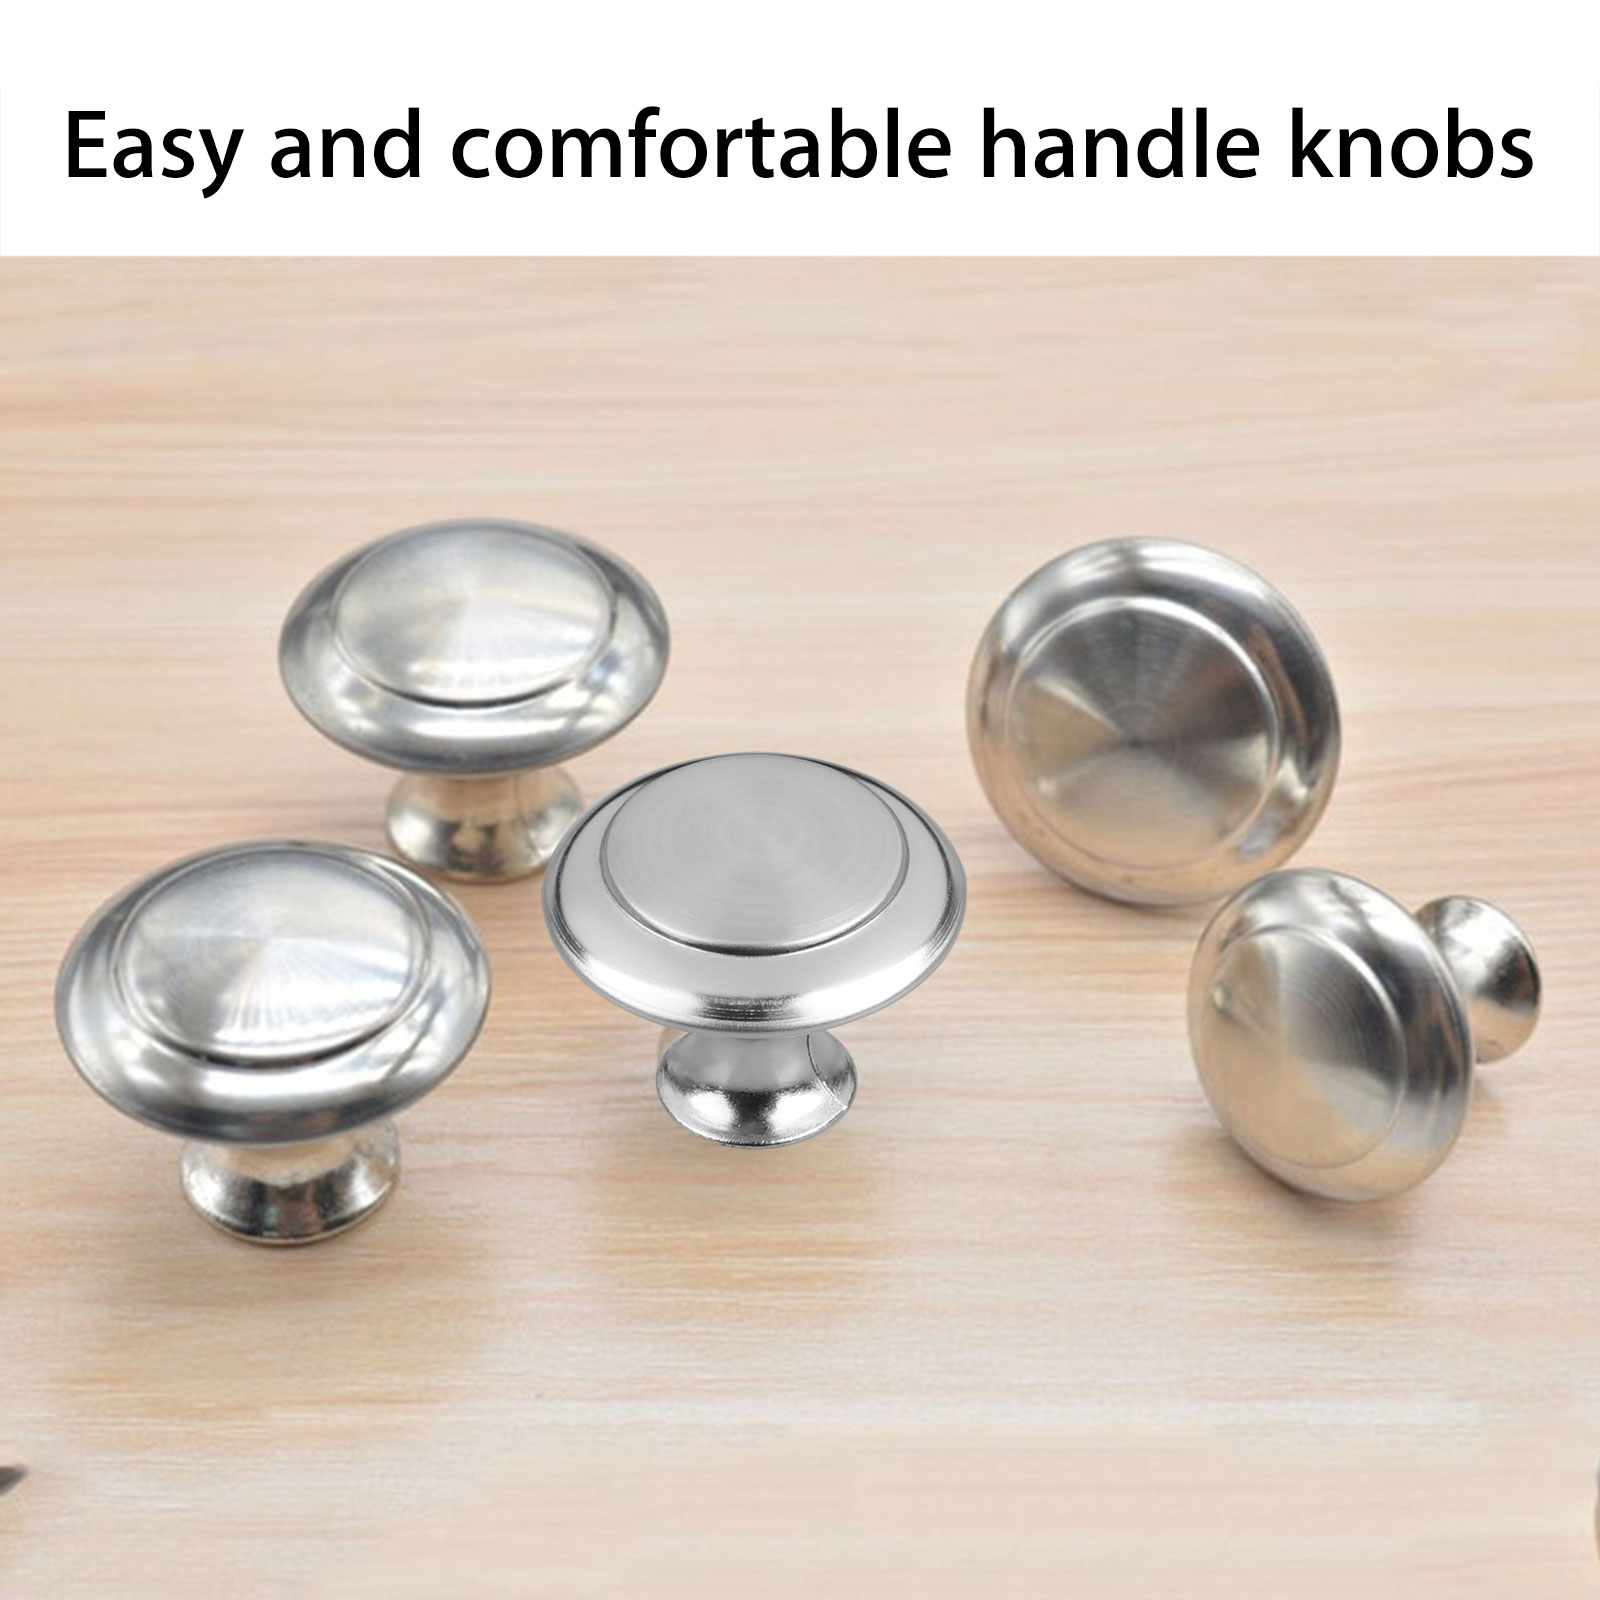 40/20pcs Kitchen Cabinet Heavy Pull Knobs, EEEkit Brushed Nickel Cabinet Knobs Cupboard Door Knobs Kitchen Hardware Round Pull Knobs for Bathroom Drawer, Silver - image 5 of 9